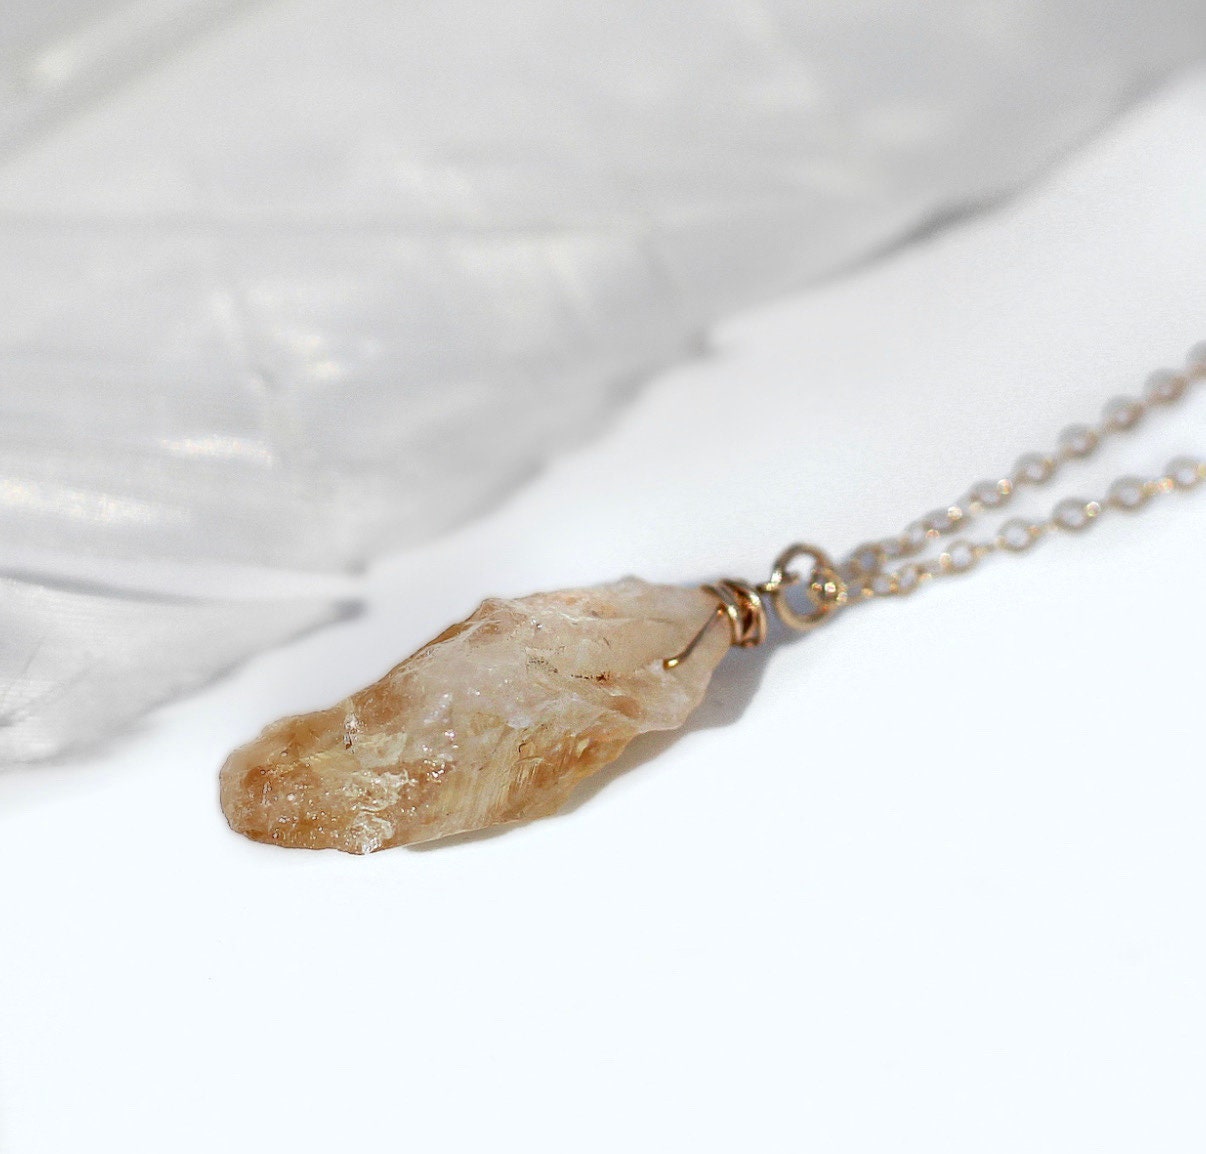 Citrine Nugget Necklace, Gold Filled Necklace, Layering Necklaces, Natural Crystal Stone Necklace, Citrine Jewelry, Crystal Stone Necklace